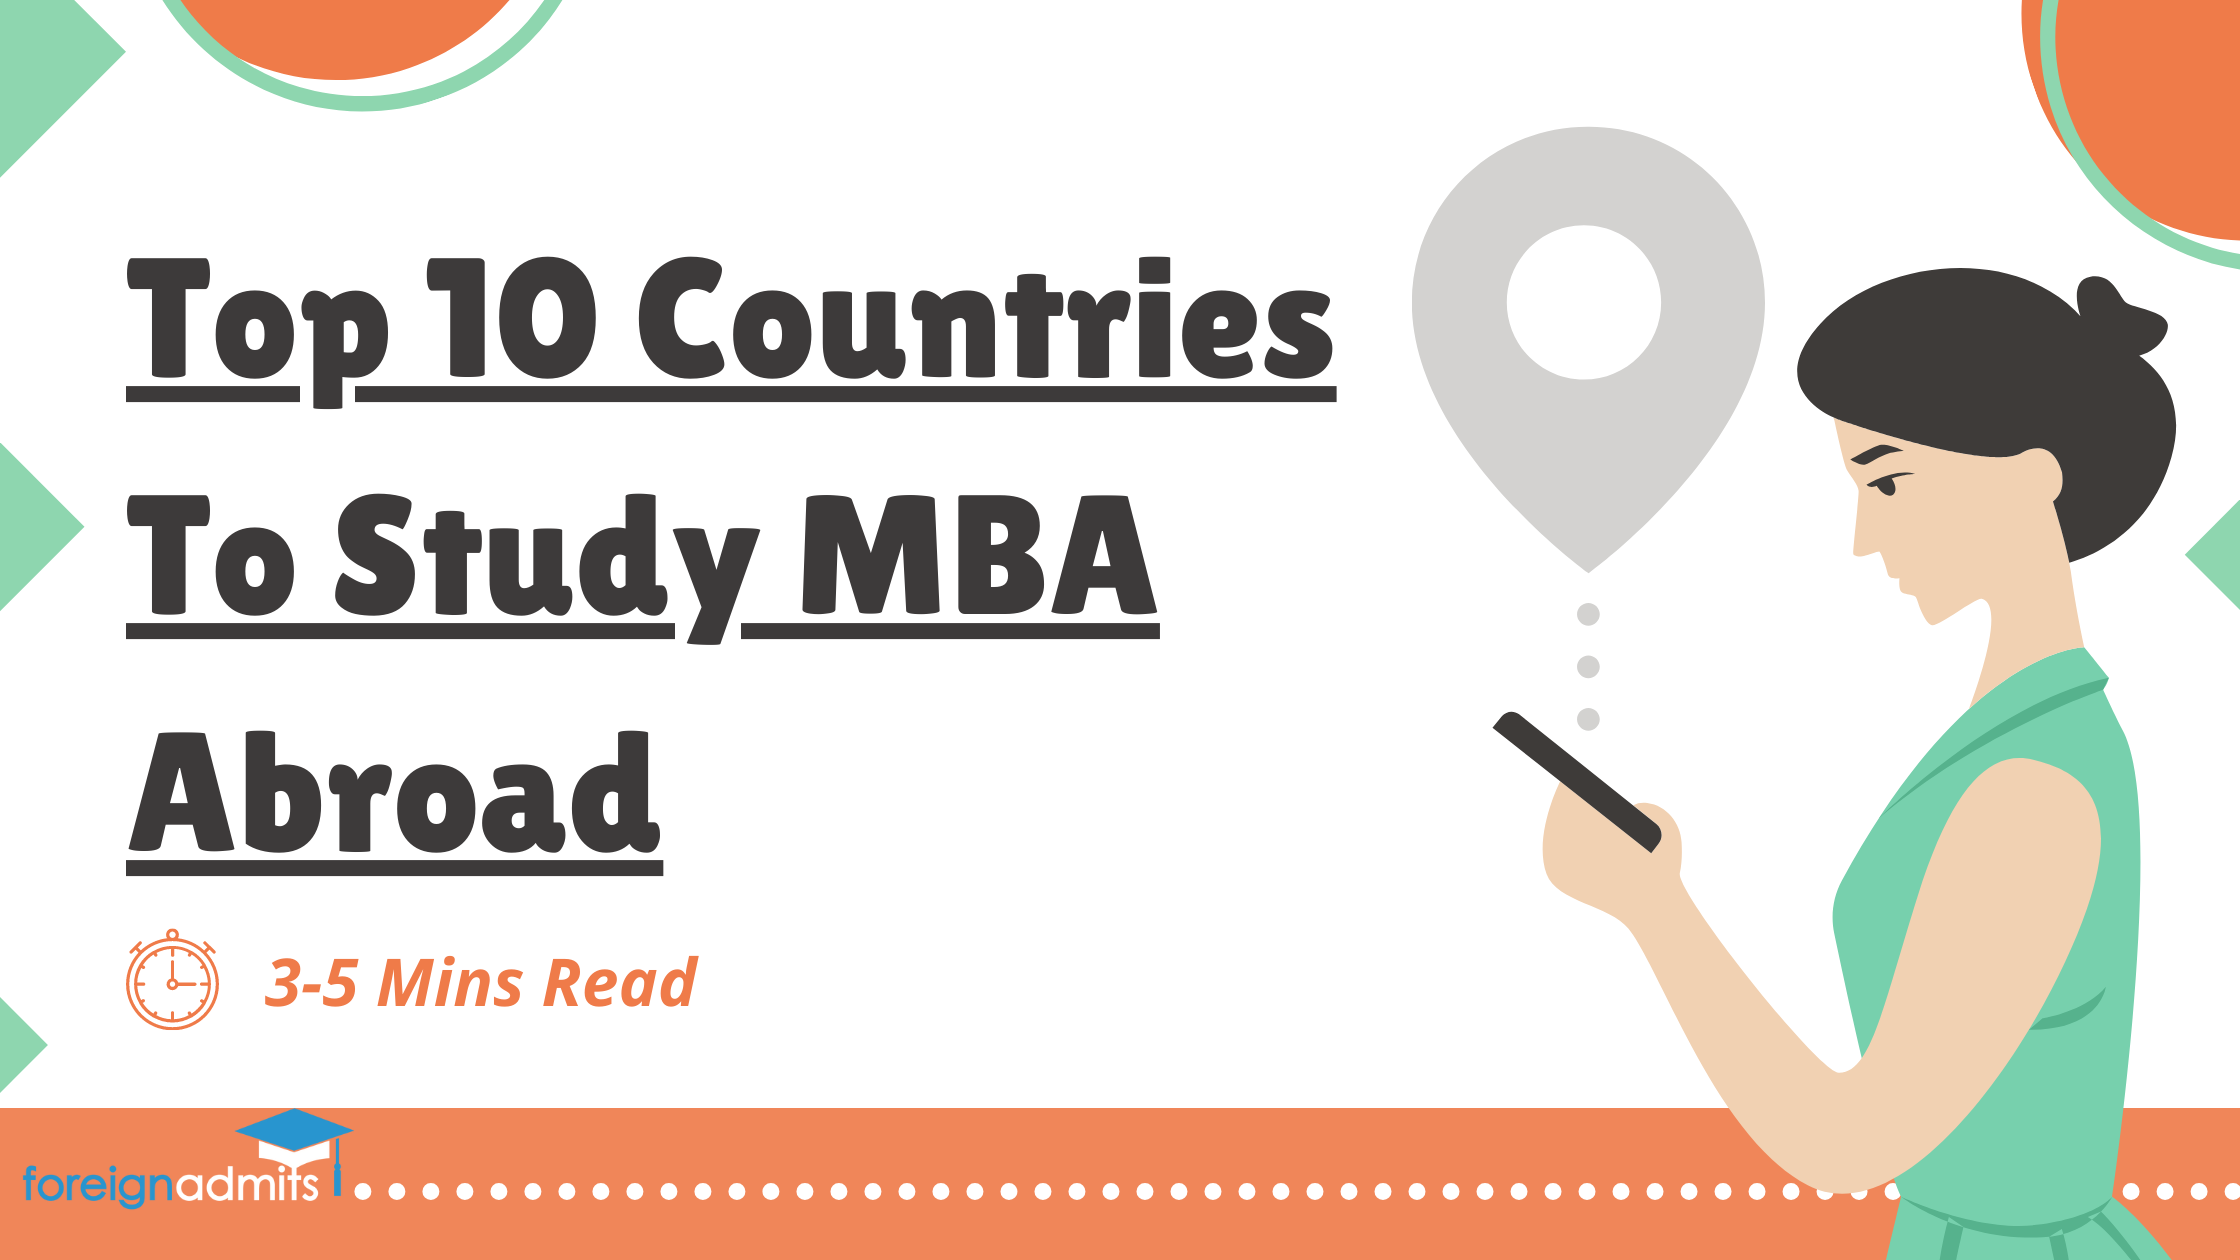 Top 10 Countries To Study MBA Abroad